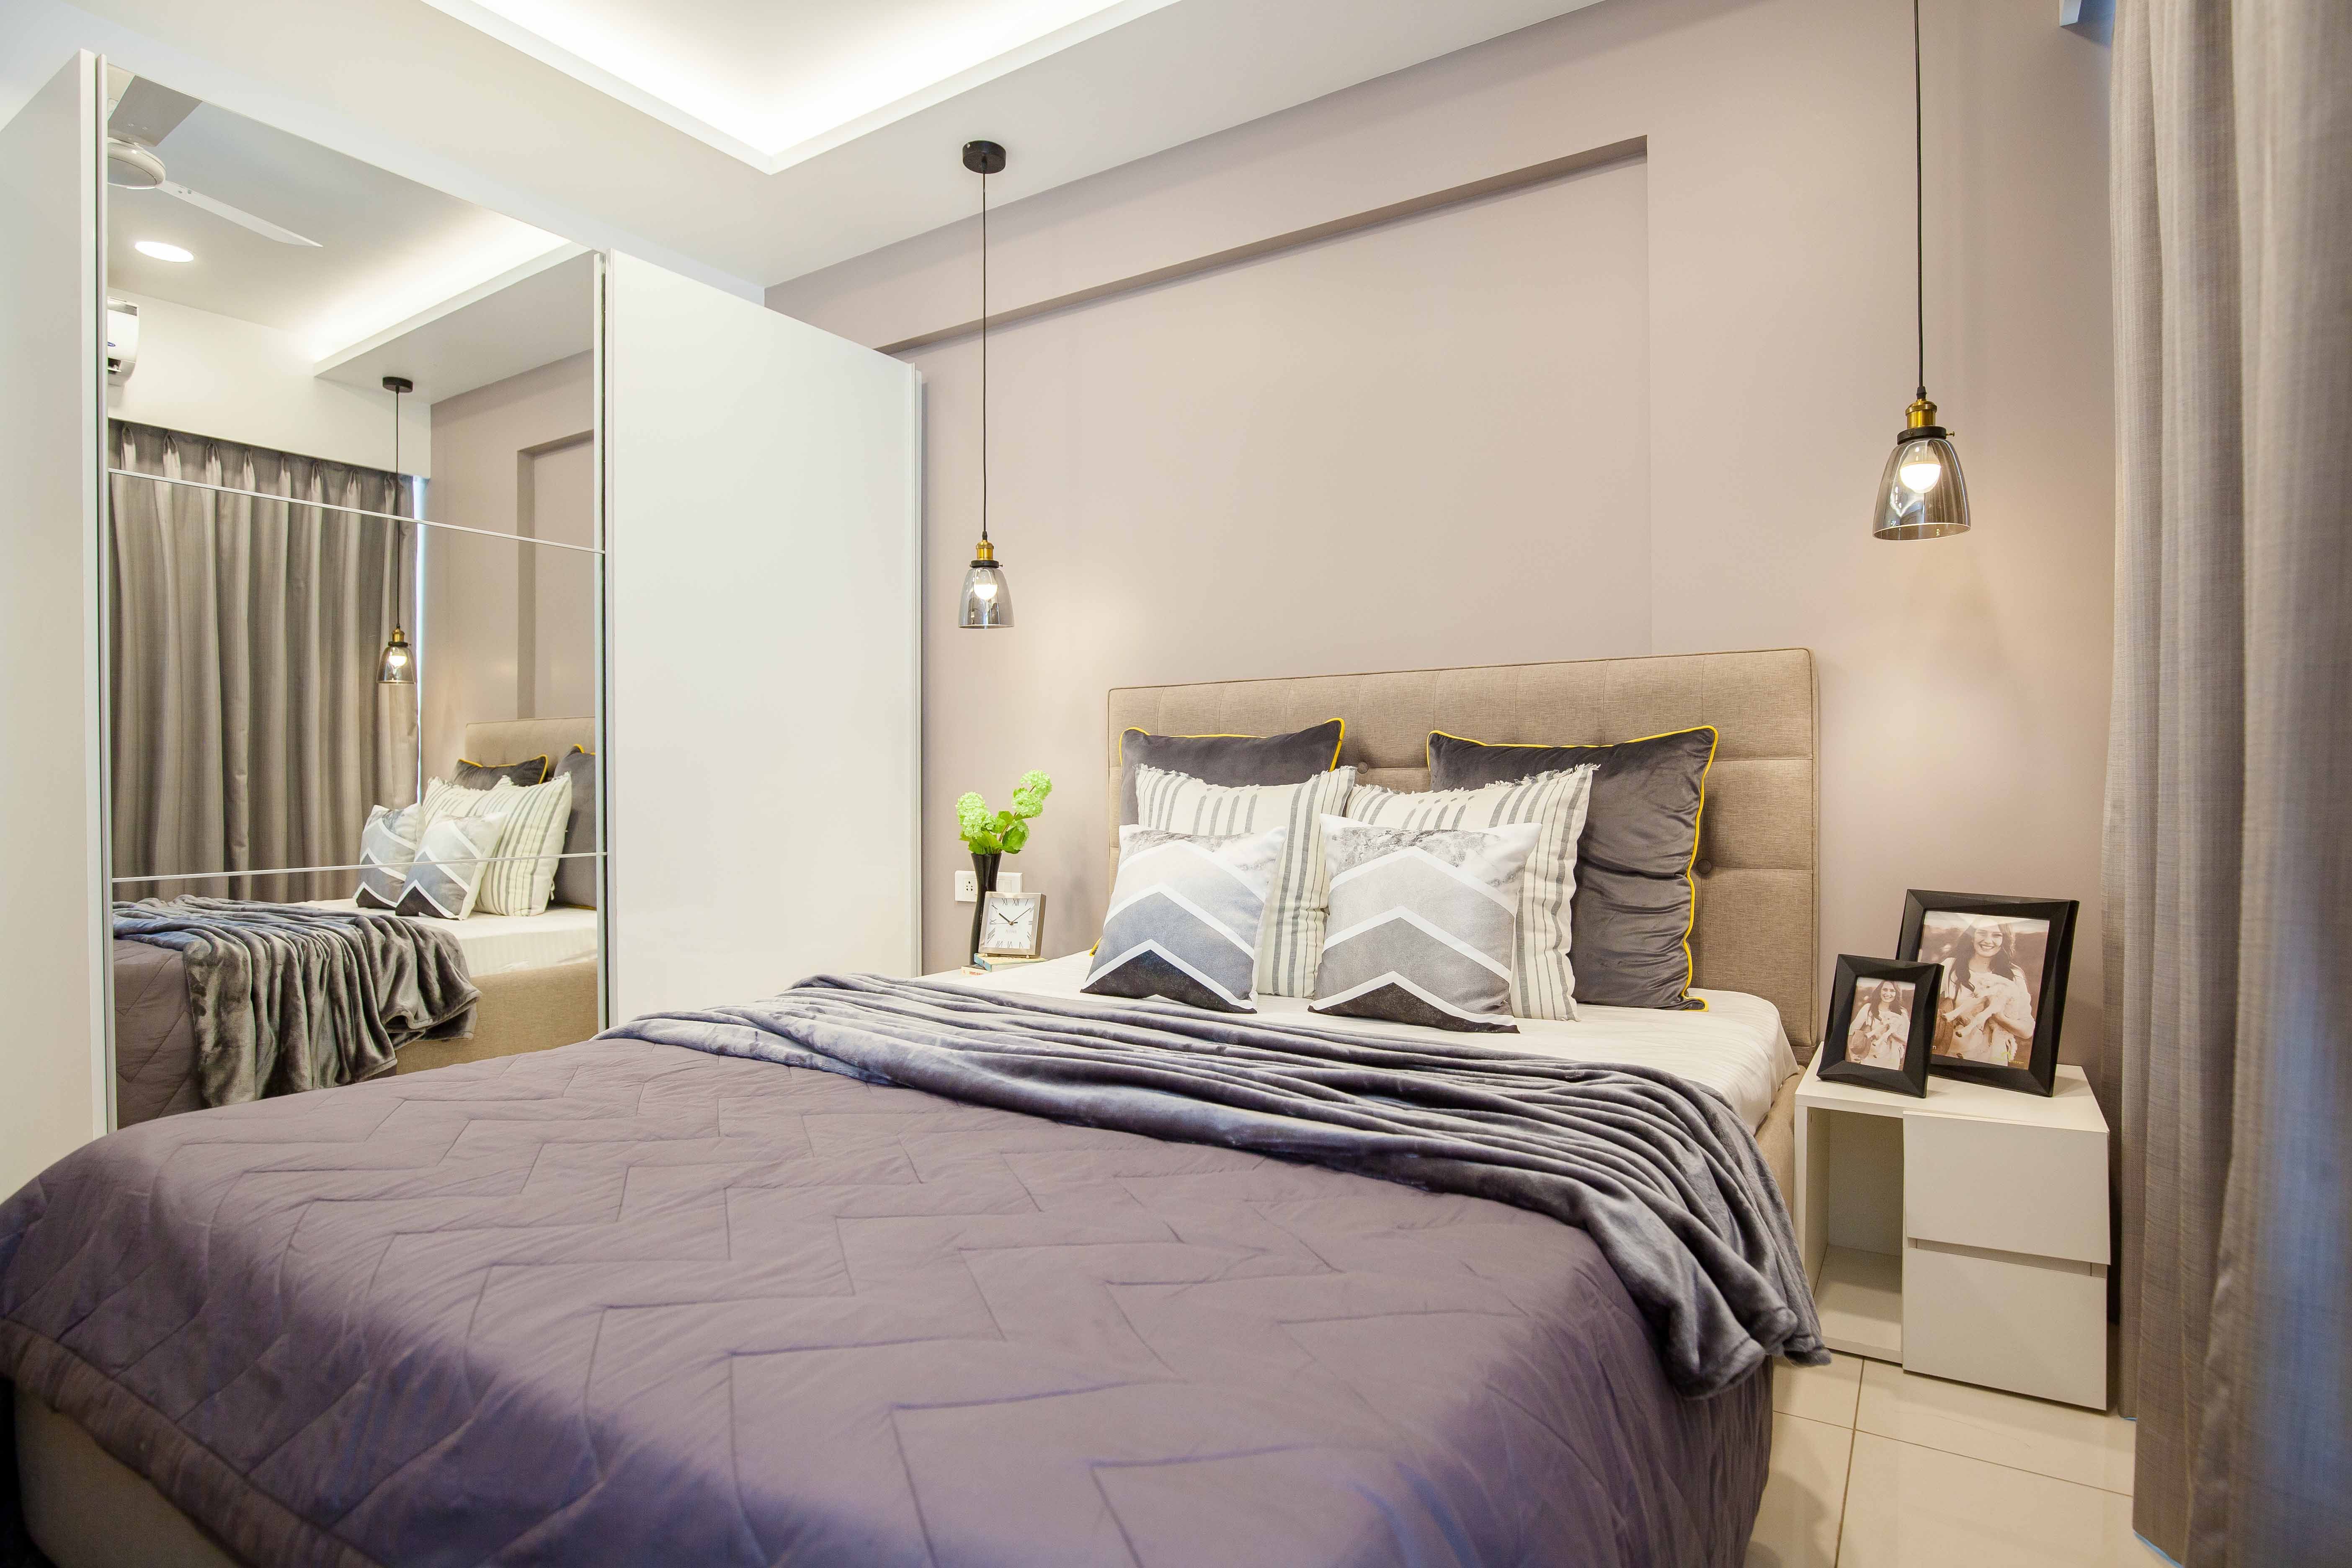 Modern 2-BHK Flat Design In Pune With Lavender And White Guest Room Design